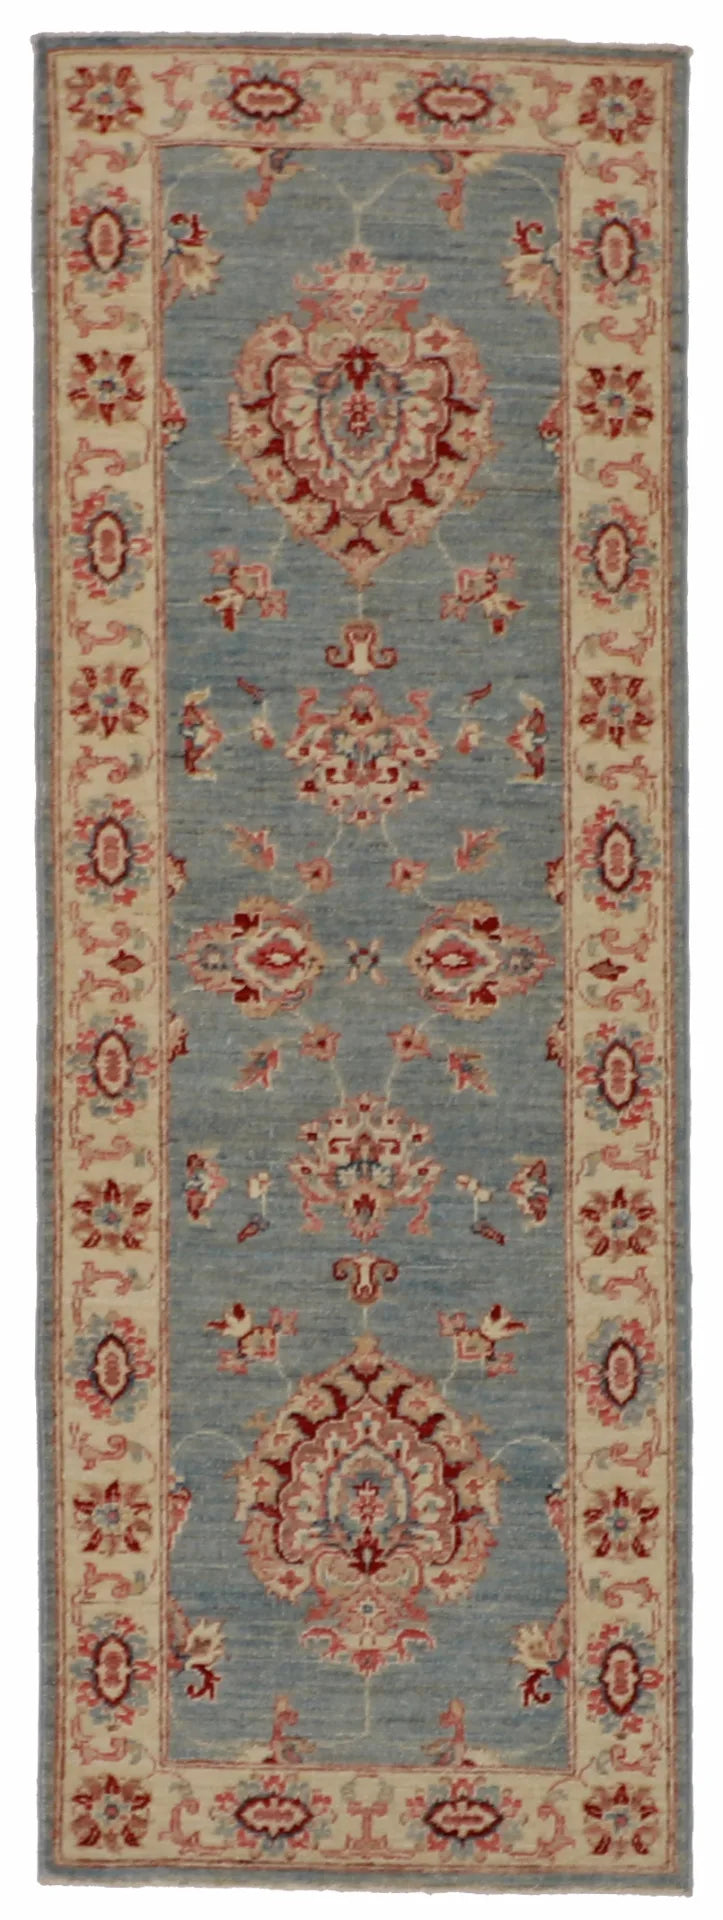 Runner - Tabriz Fine/Wool All Over Rectangle - Hand Knotted Rug